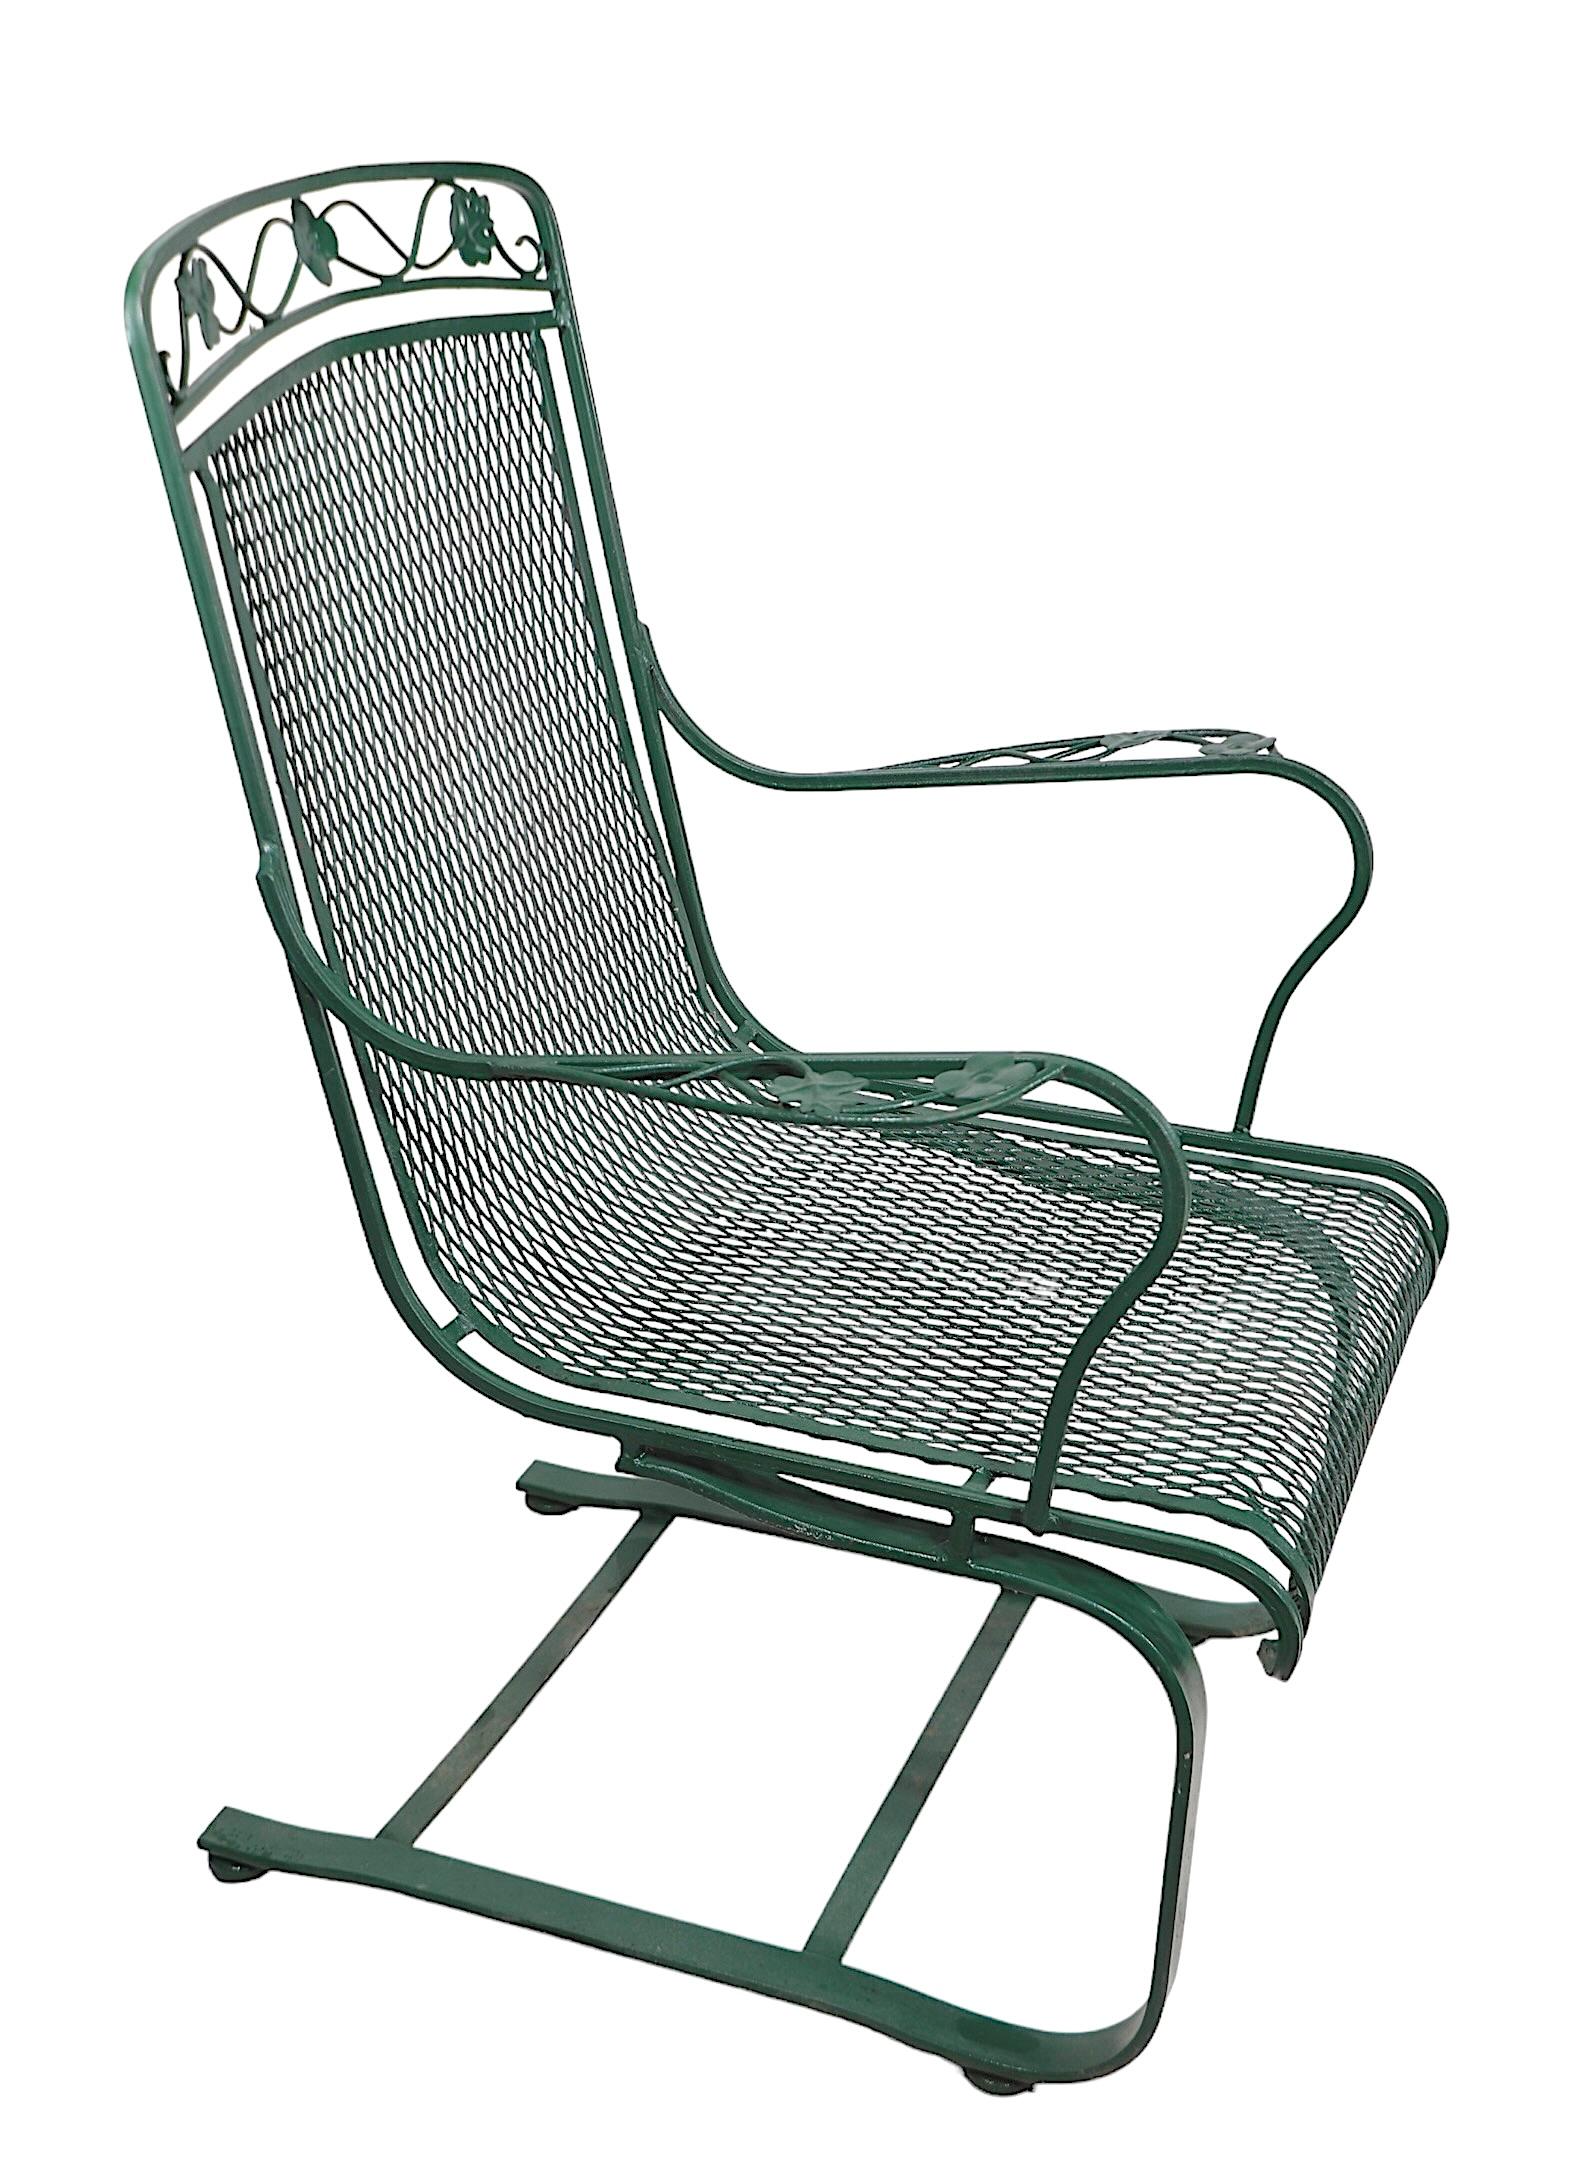 Pair of wrought iron and metal mesh cantilevered lounge chairs, by Meadowcraft, as part of the Dogwood pattern series, circa 1950/1970's. The chairs are in very good, clean, original, ready to use condition, showing only light cosmetic wear, normal